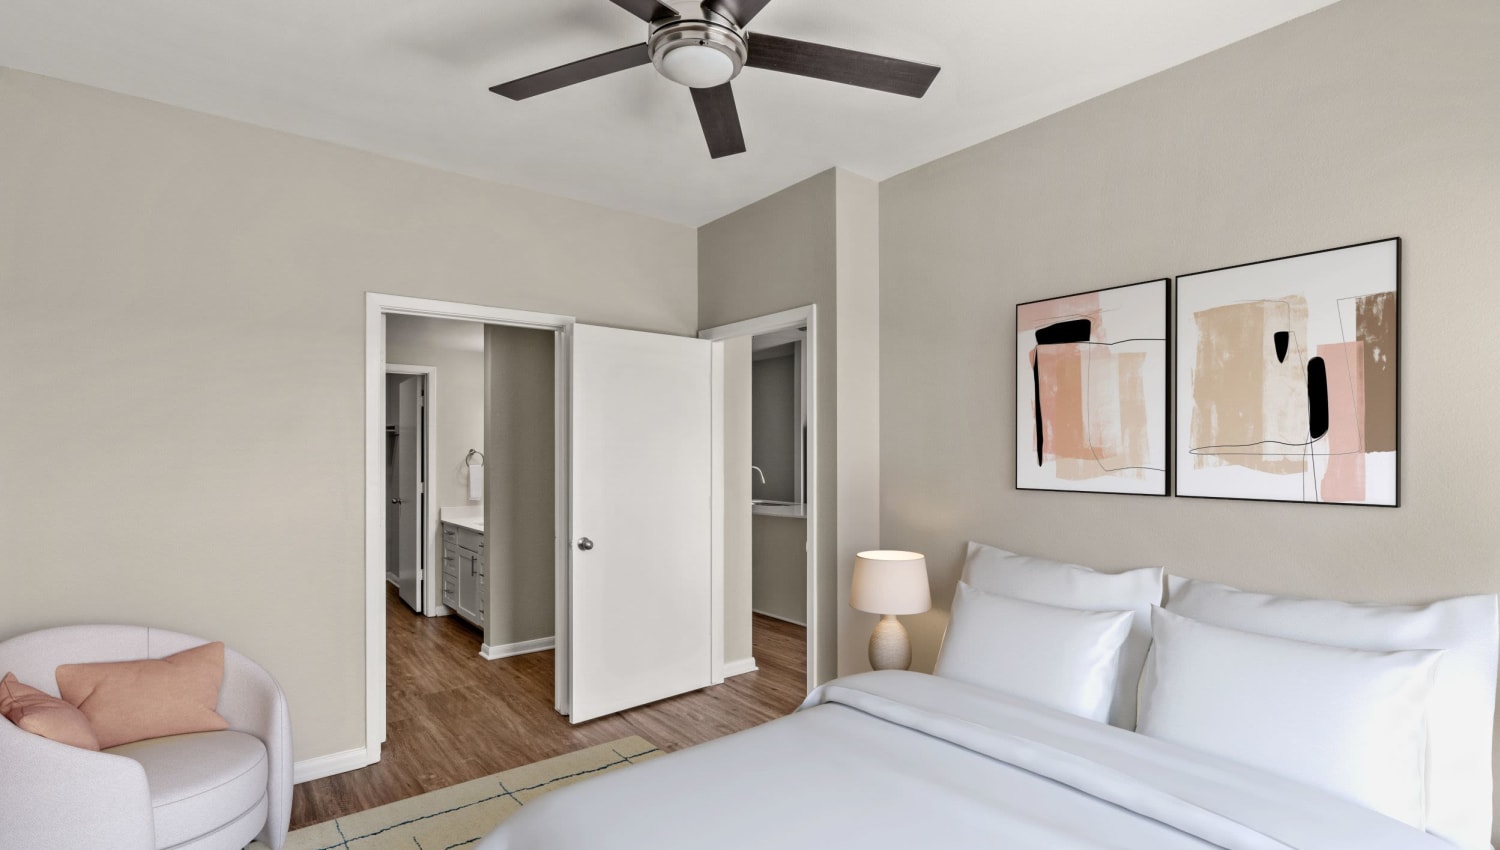 Main bedroom with attached bathroom at Olympus Boulevard in Frisco, Texas